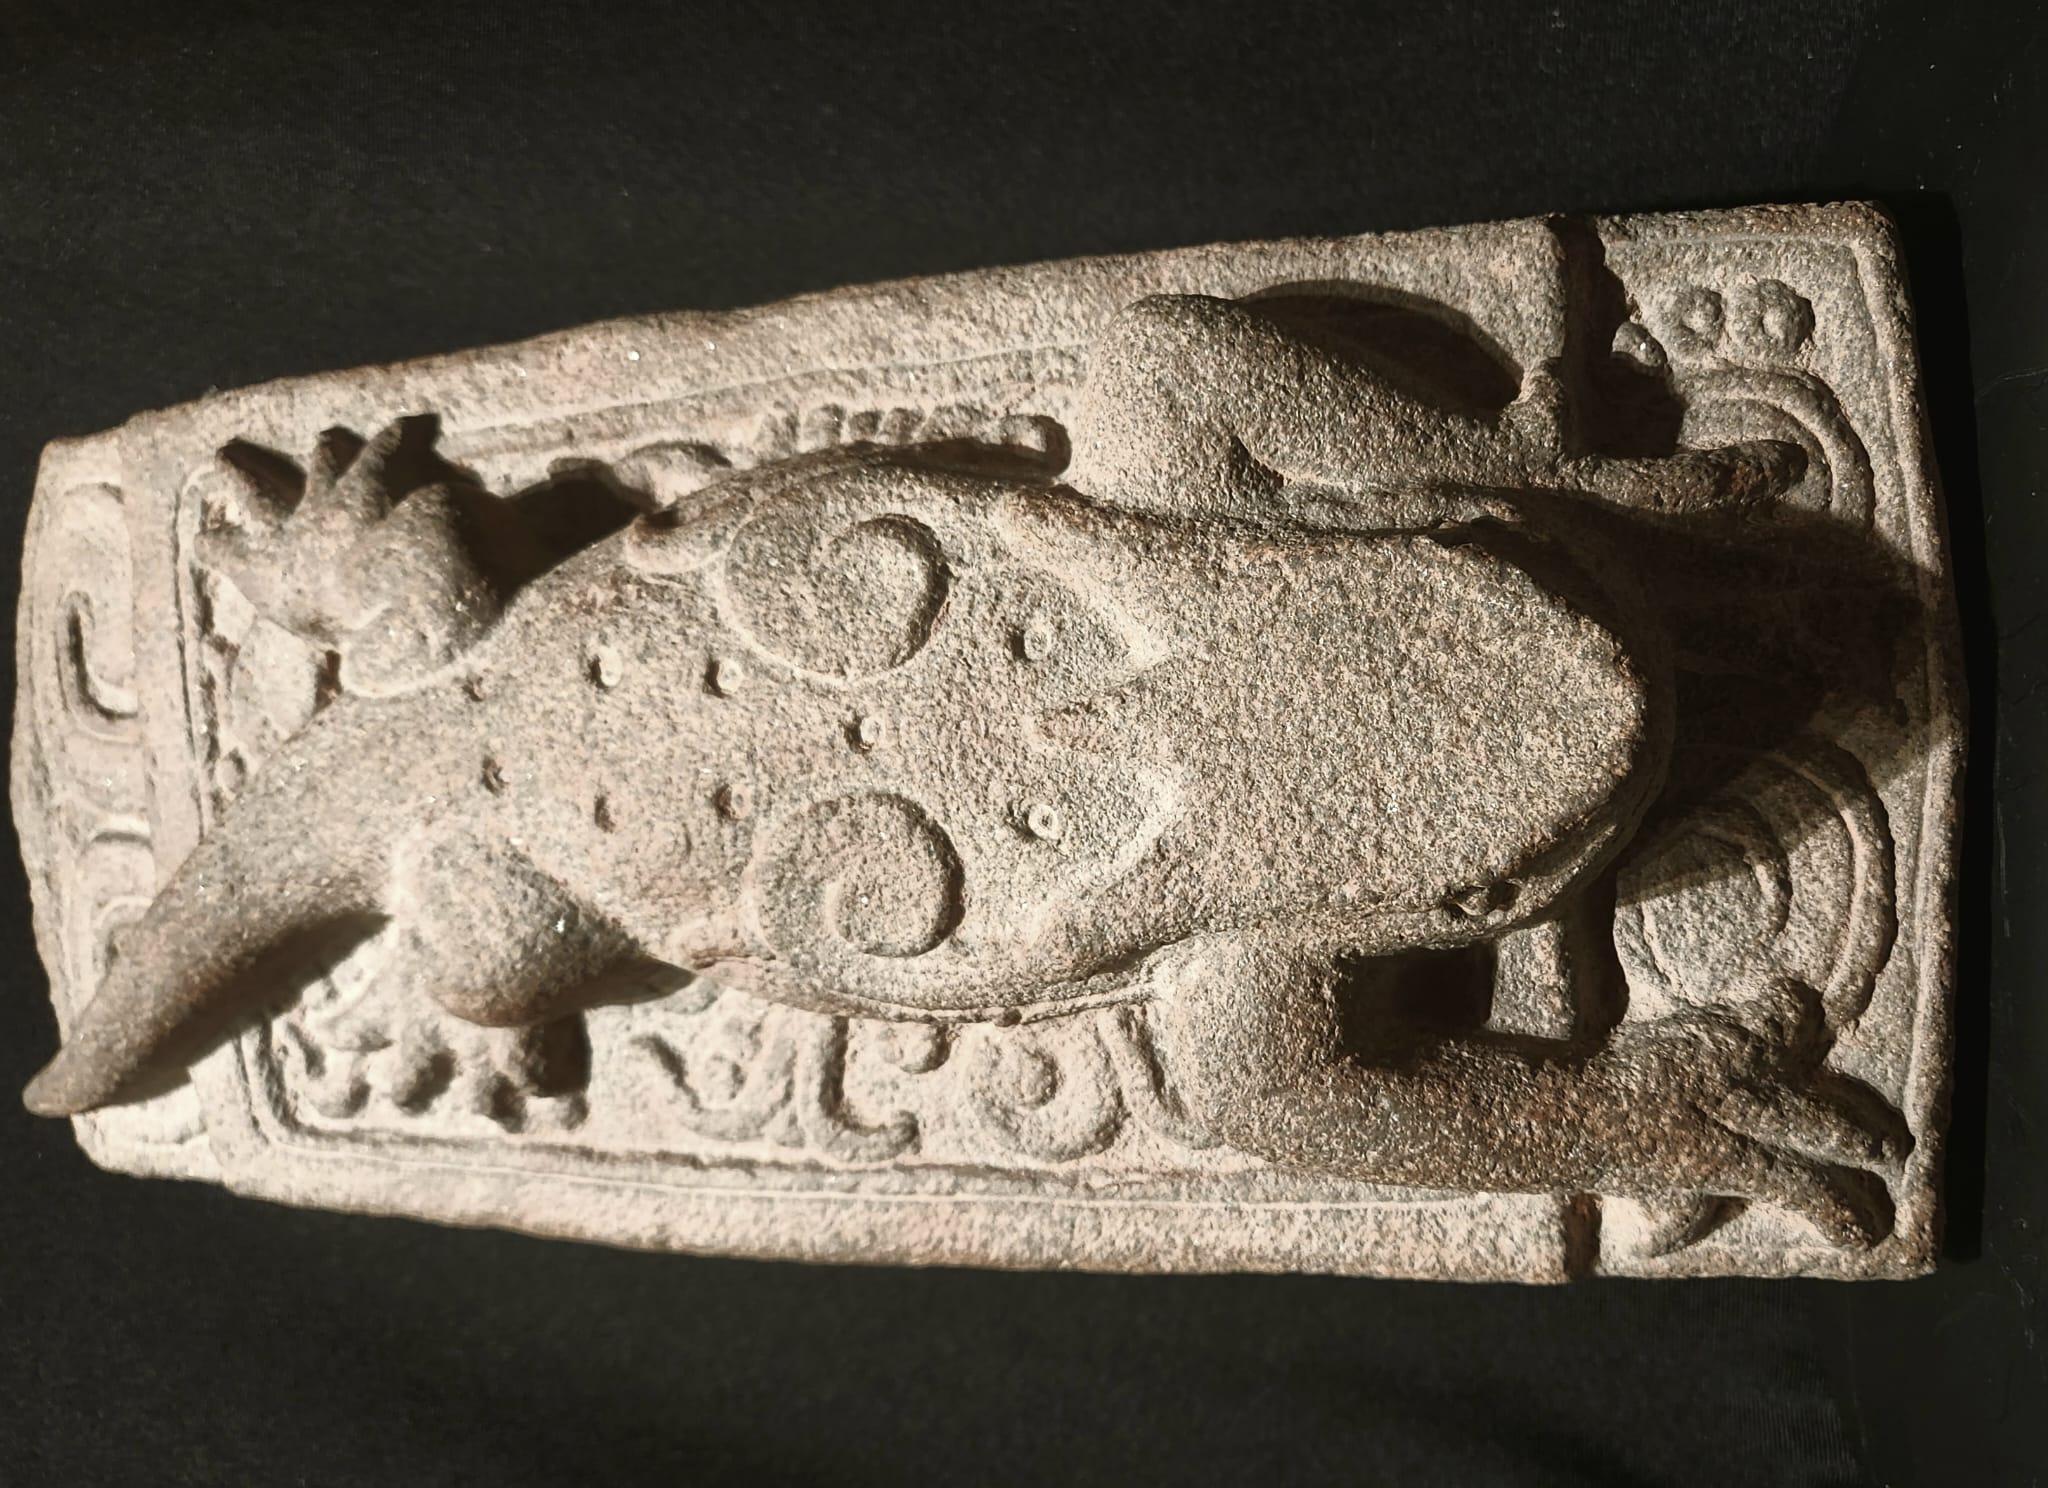 A superb relief-carved panel depicting the Maya Deity Itzamna, appearing as an Iguana, stretched out on a platform with long-toed limbs splayed